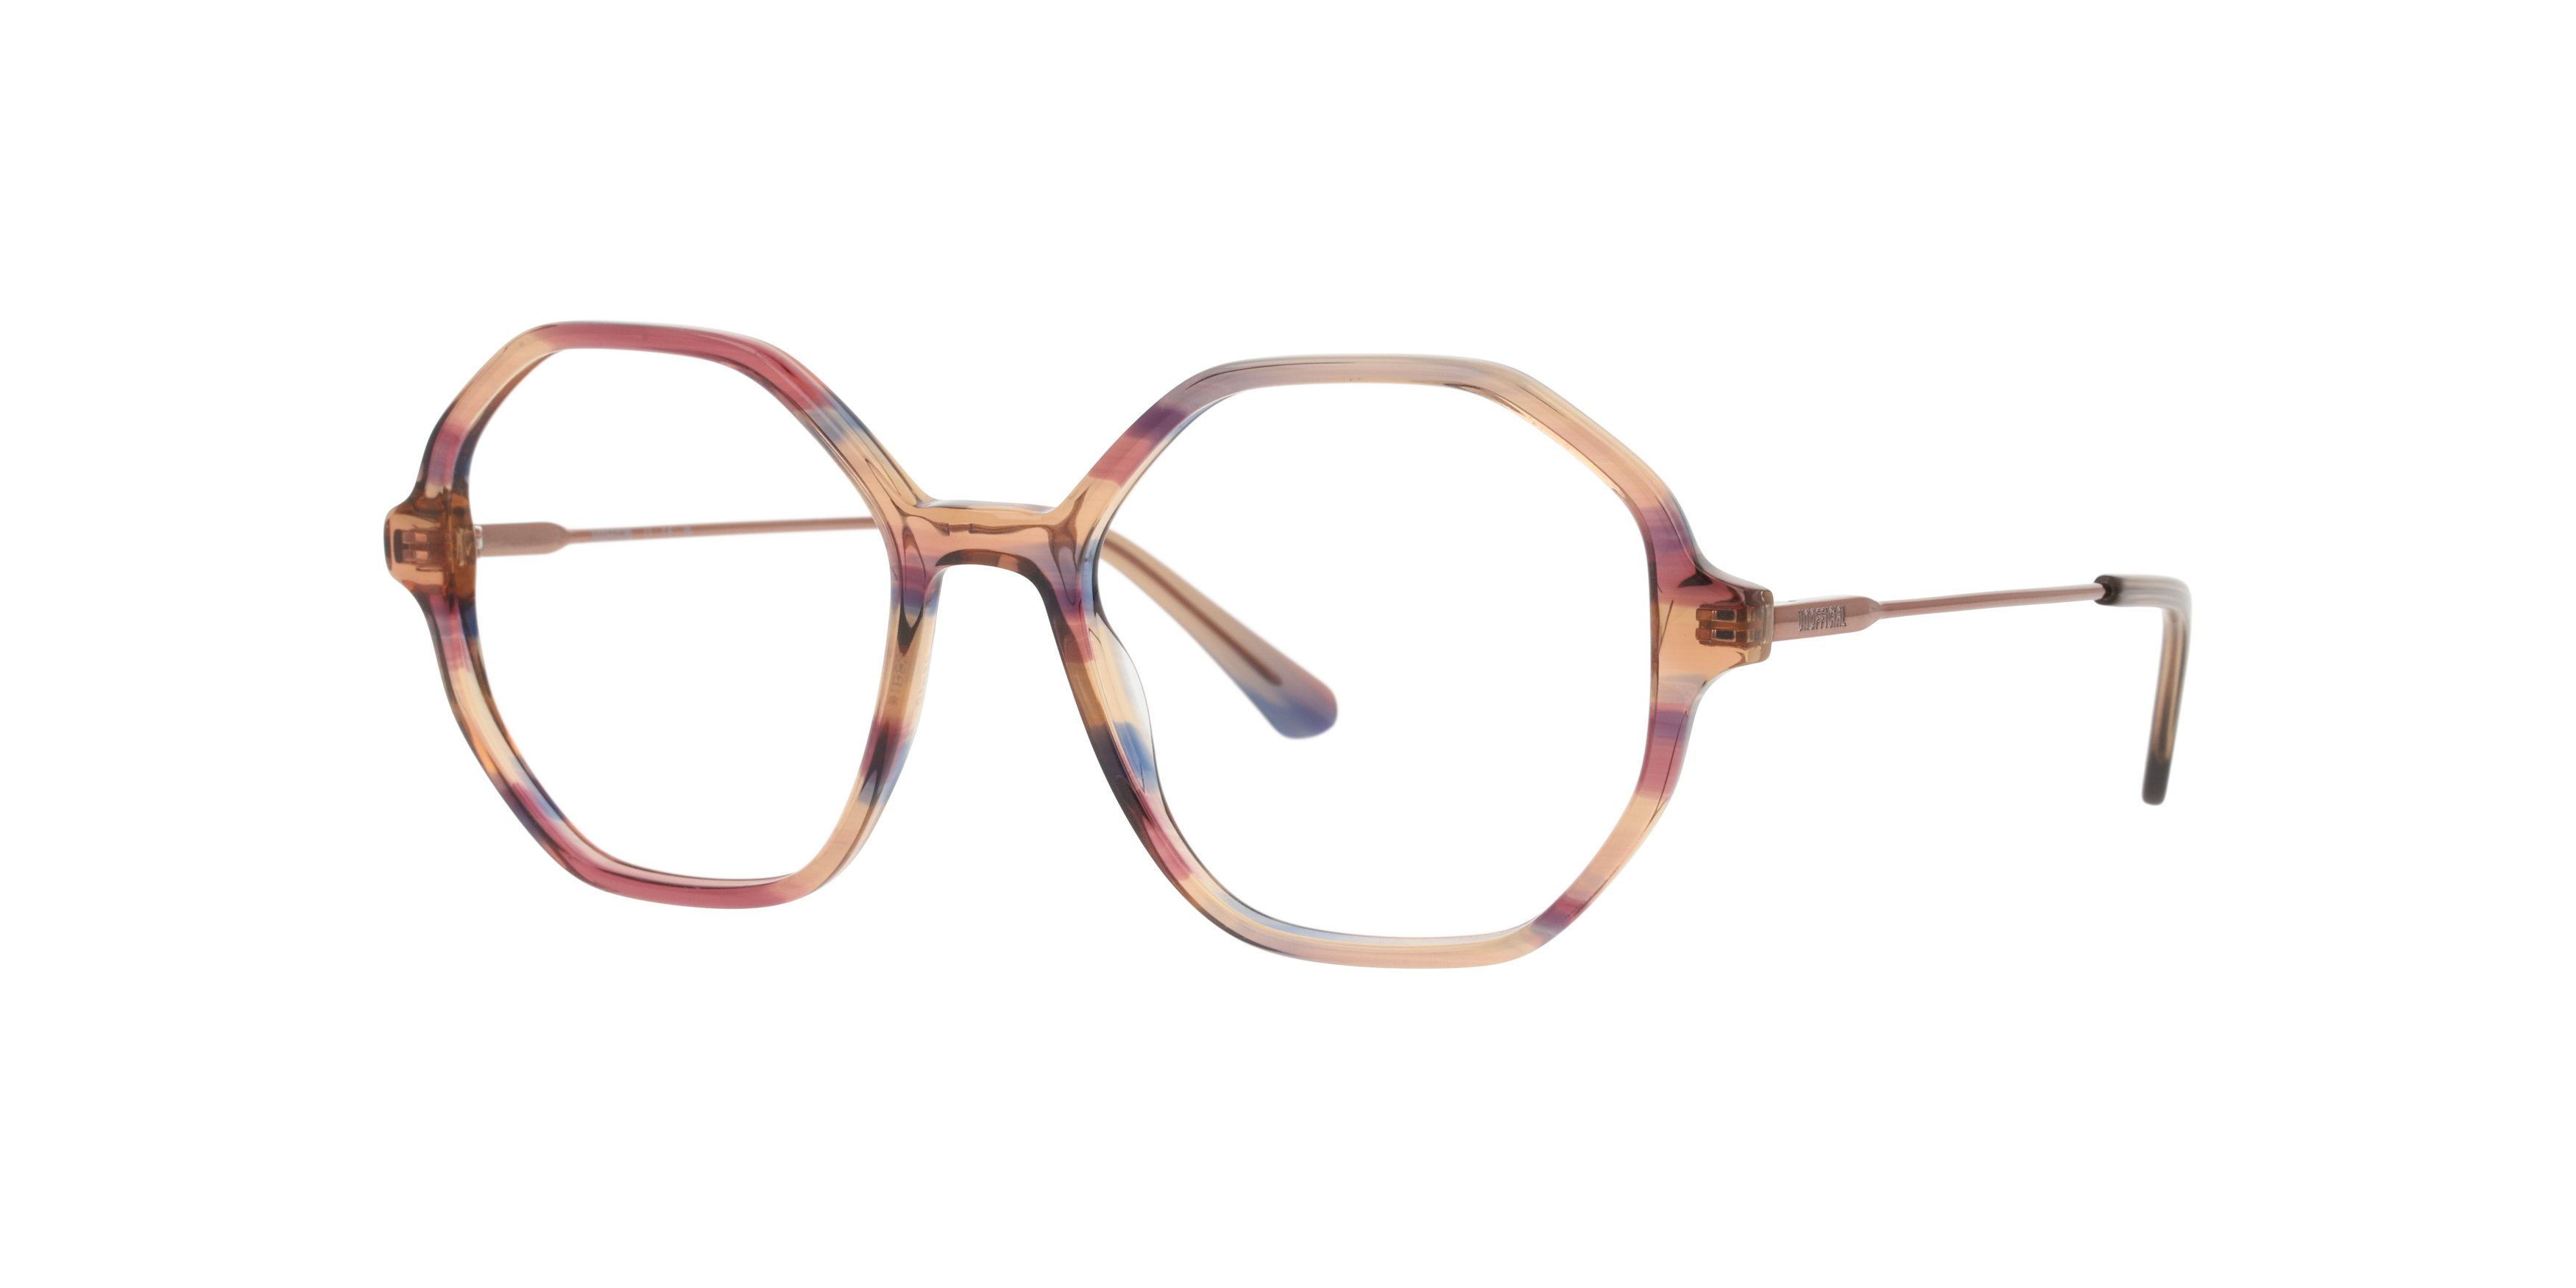 Angle_Left01 Unofficial UO2198 Glasses Transparent / Brown